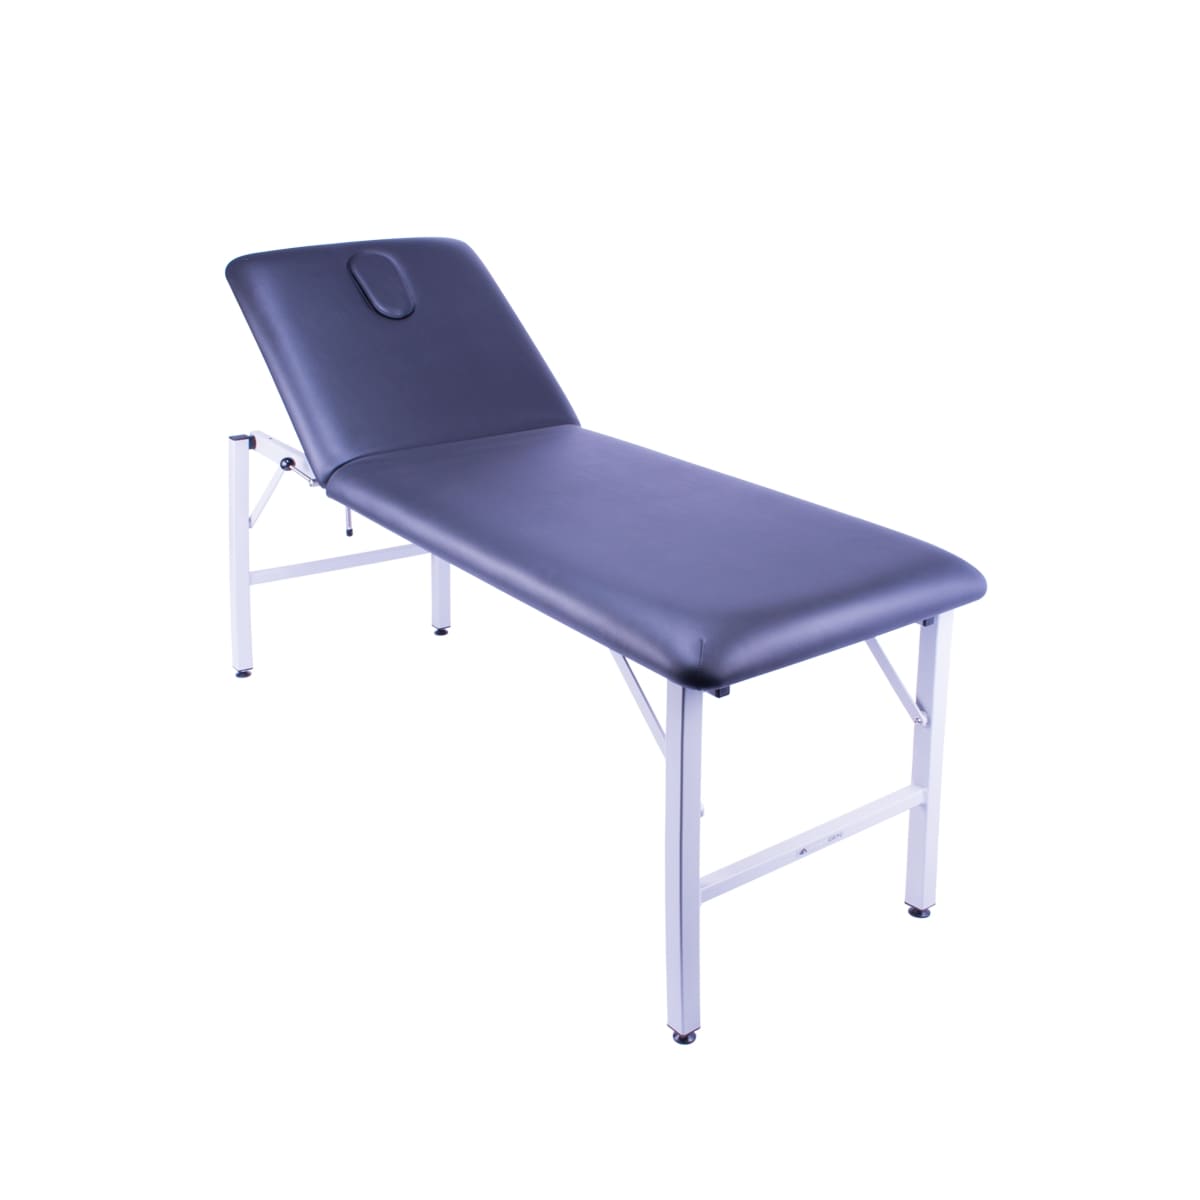 Physiotherapy Treatment Table